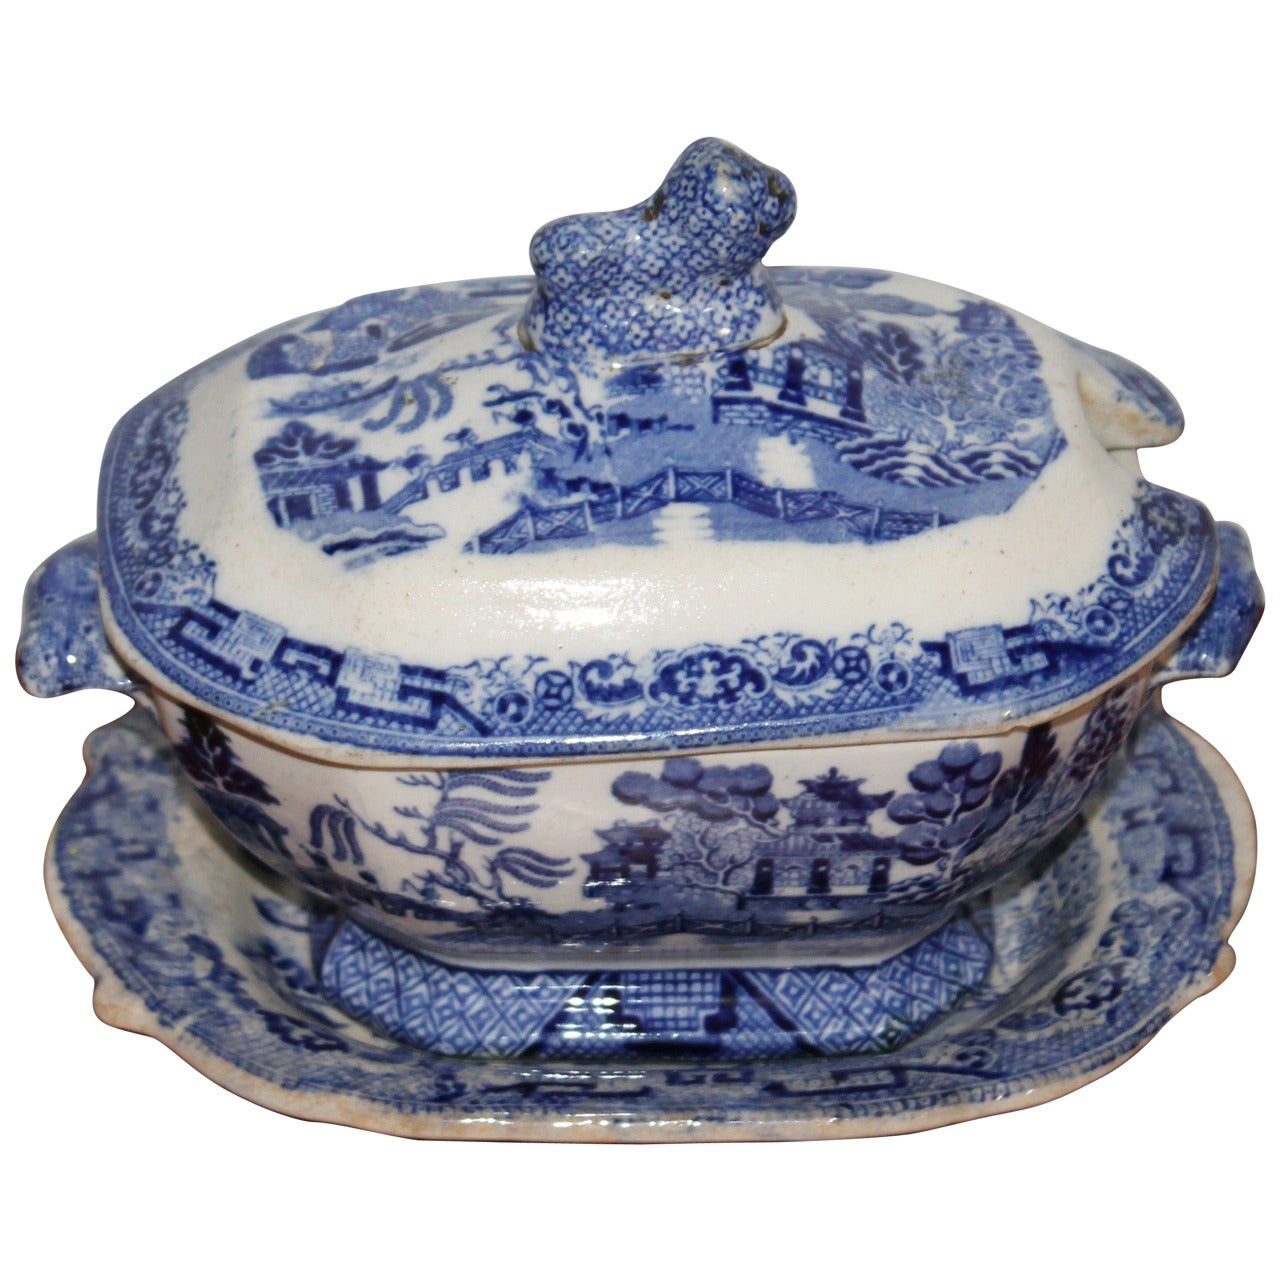 Early Mid-19th Century Three-Piece Set of Blue Willow English Diminutive Tureens